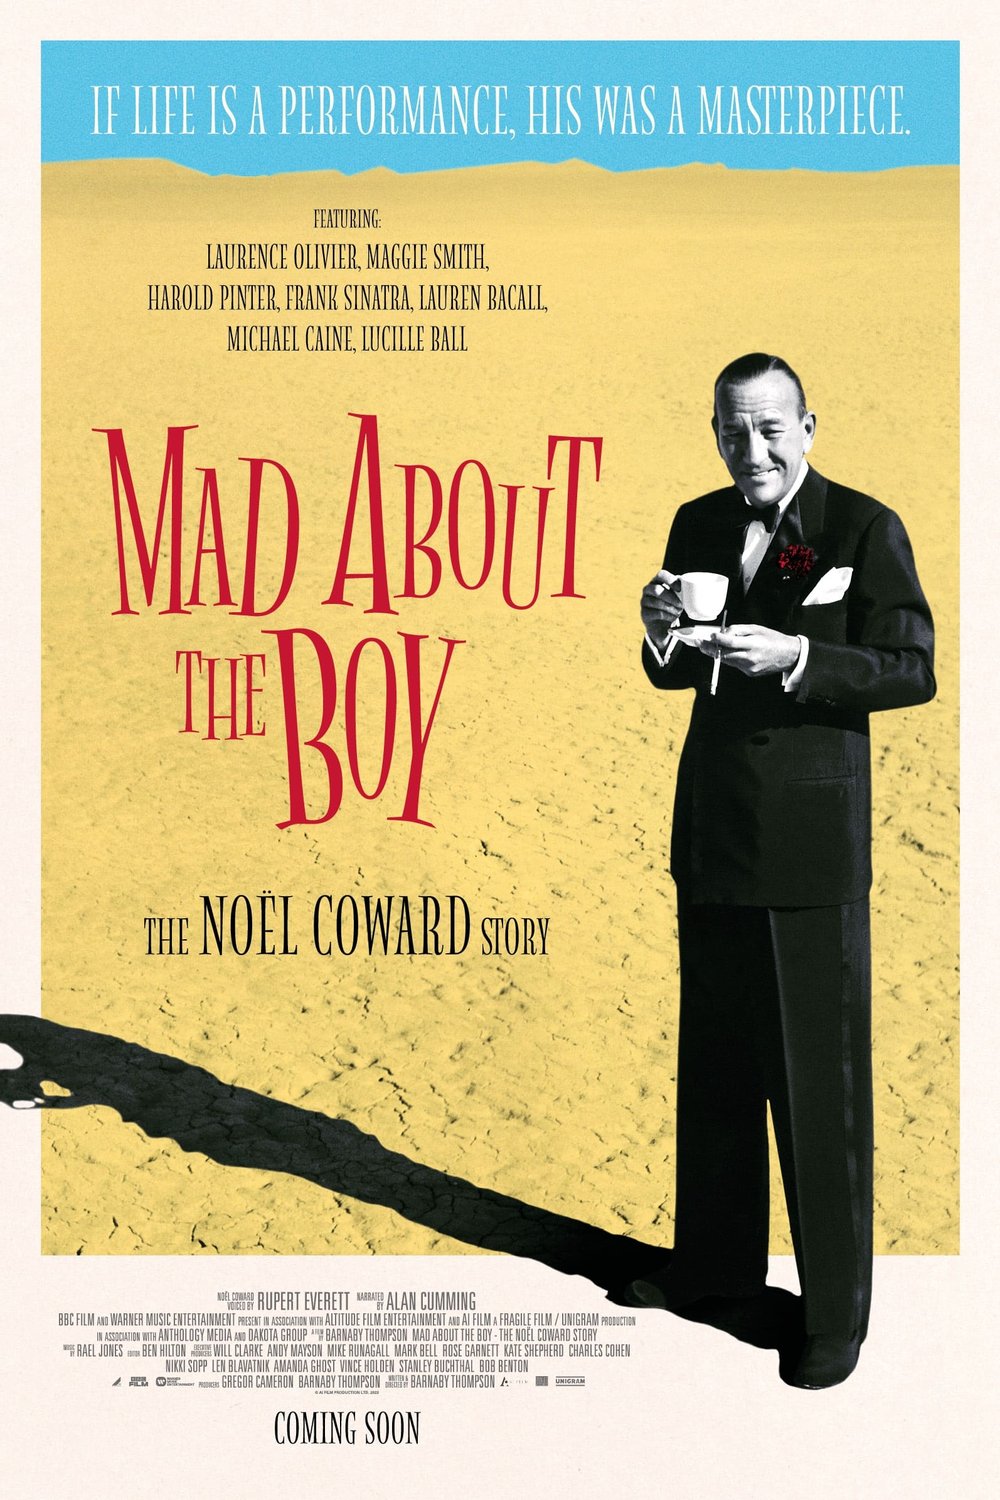 Poster of the movie Mad About the Boy: The Noel Coward Story